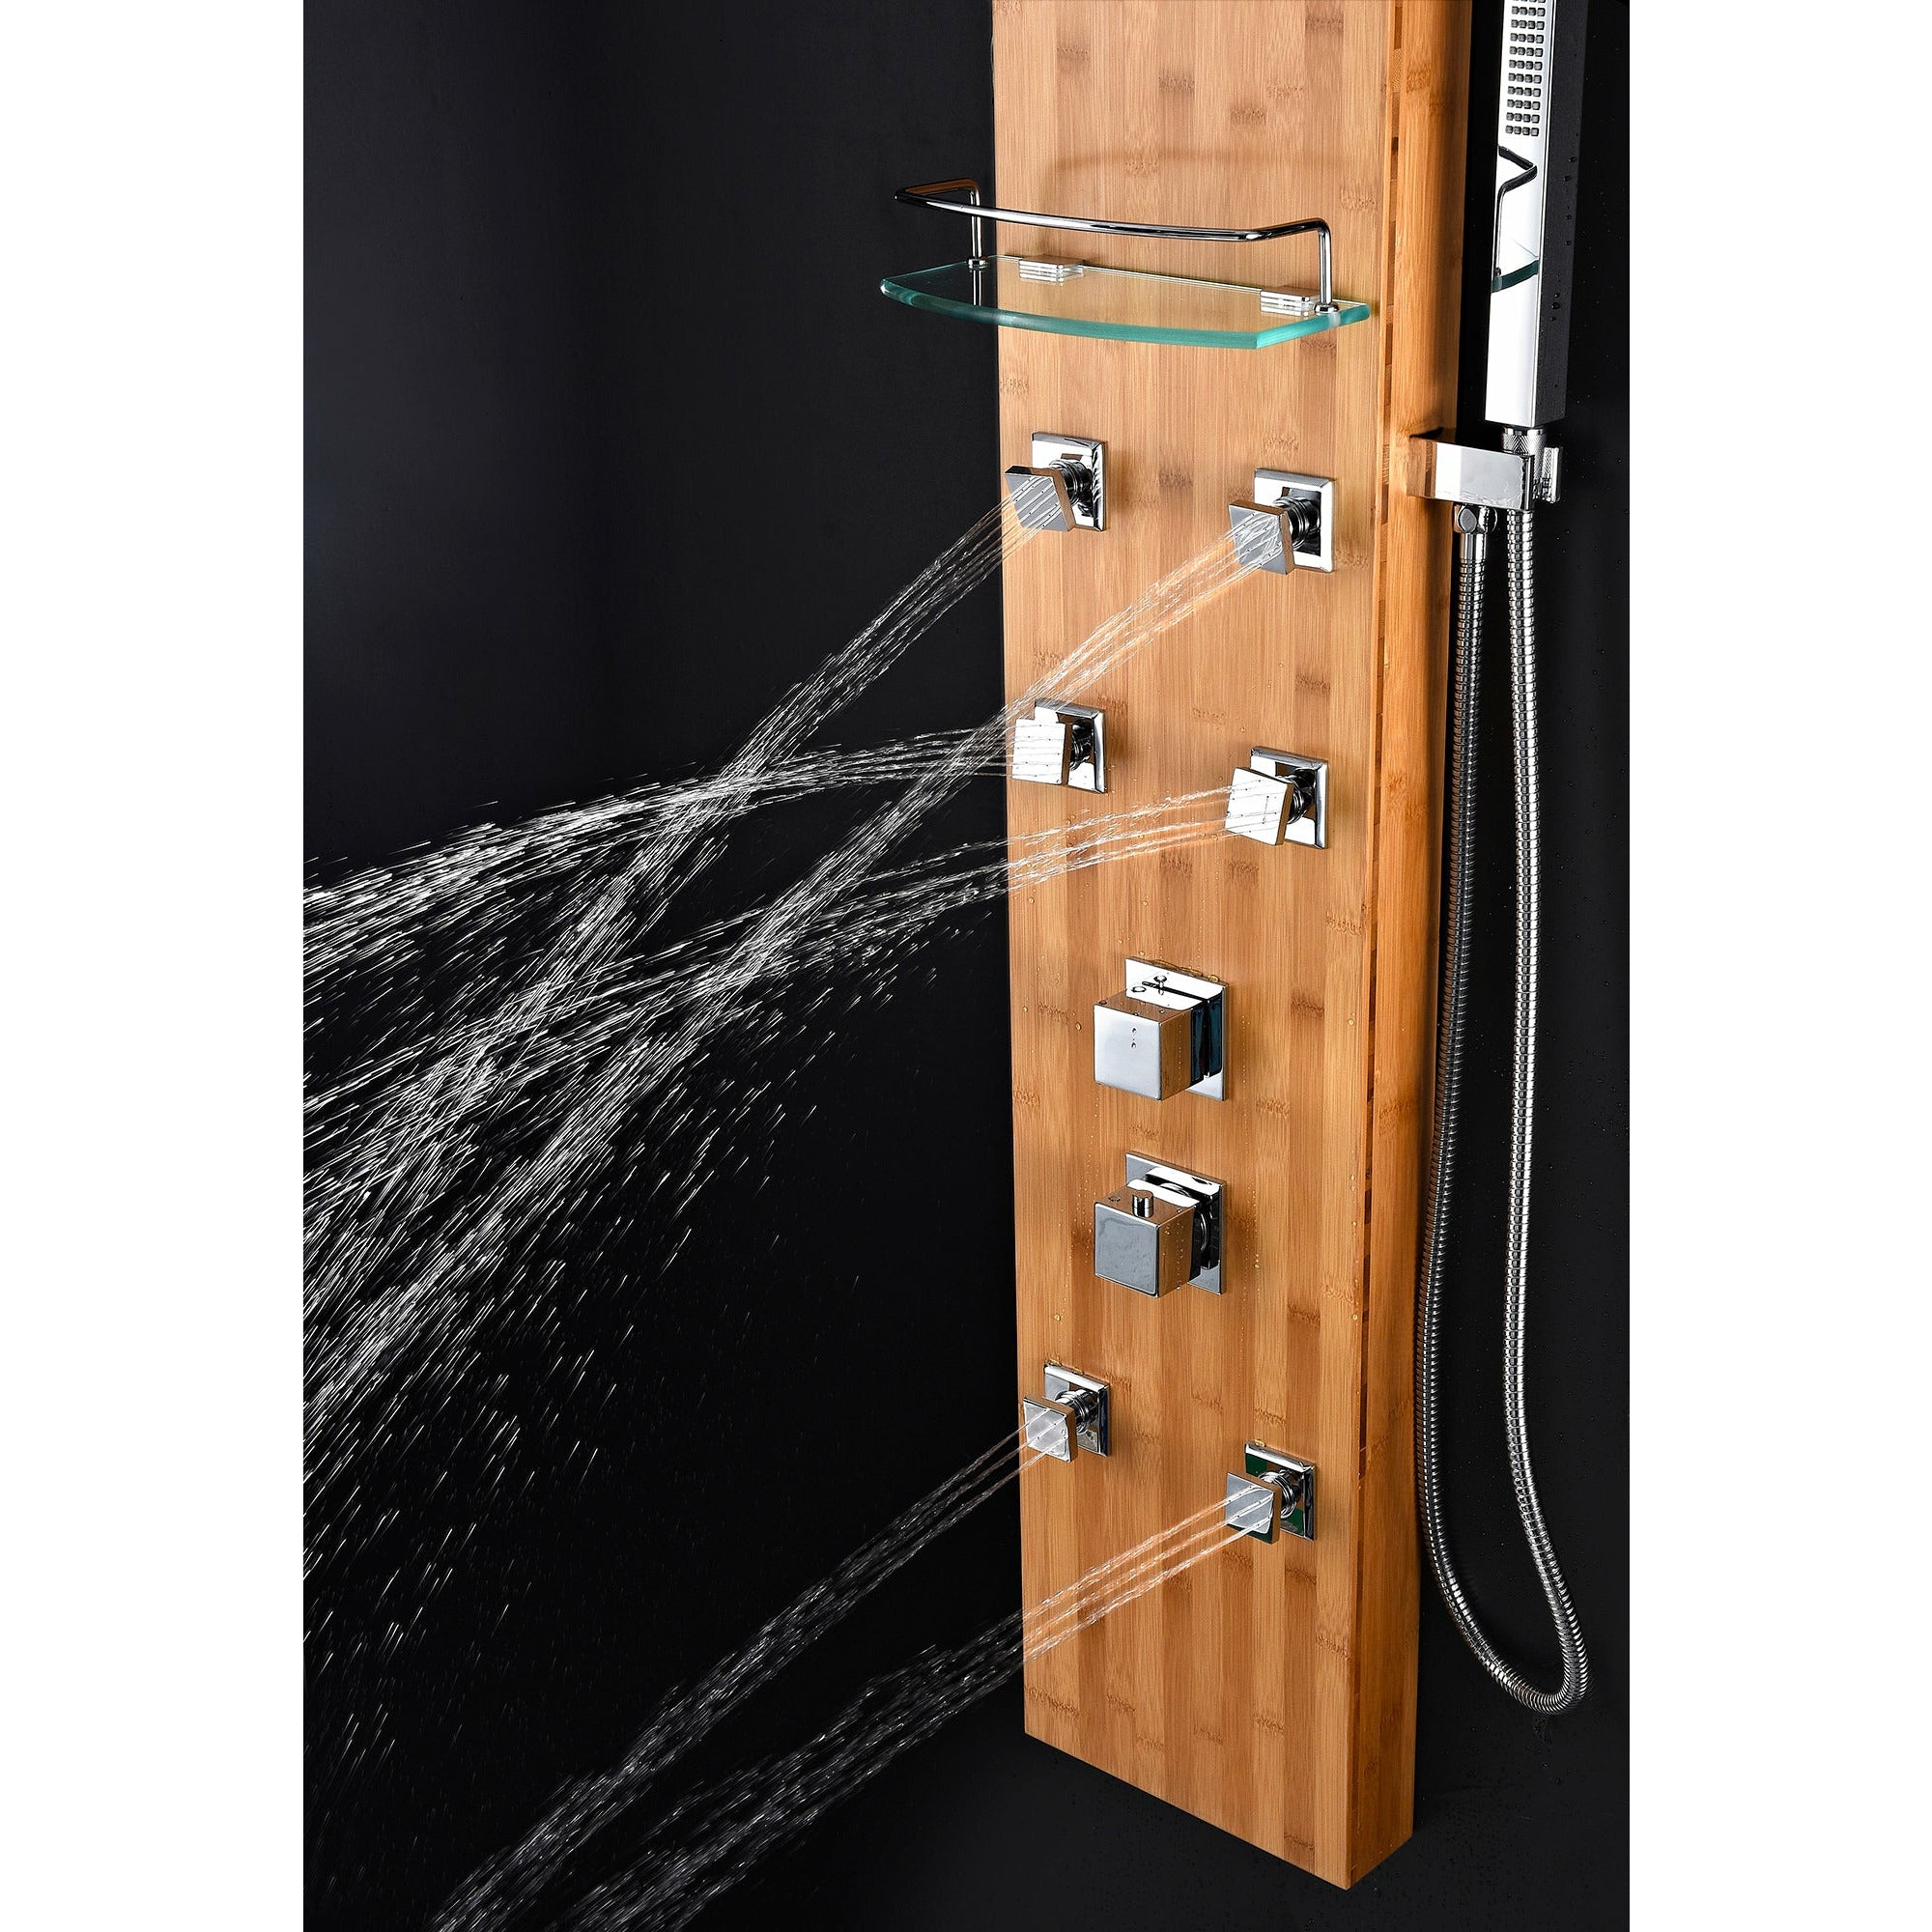 Anzzi Mansion 60 Inch Full Body Shower Panel with Deco-glass Shampoo Shelves, Heavy Rain Shower Head, Acu-stream Directional Body Jets, Shower Control Knobs and Euro-grip Handheld Sprayer in Natural Bamboo SP-AZ8099 - Vital Hydrotherapy